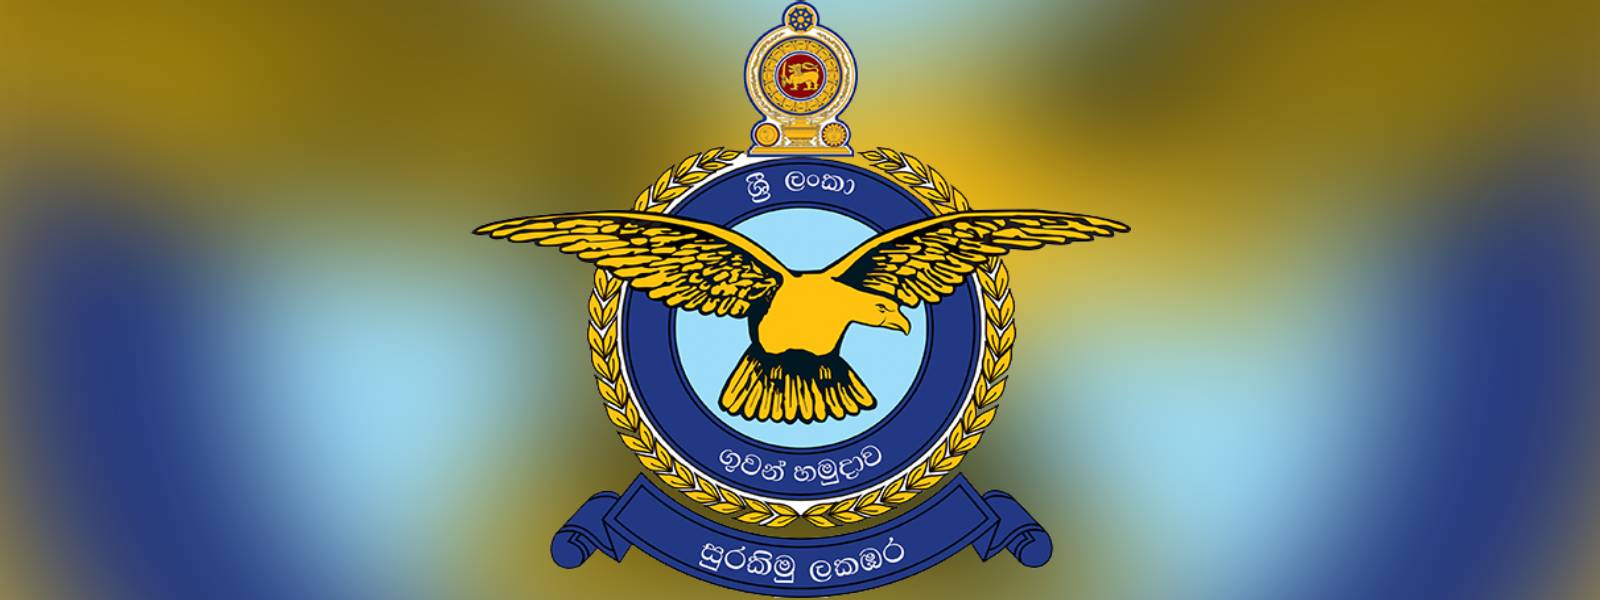 Sri Lanka Air Force makes request from public in Colombo